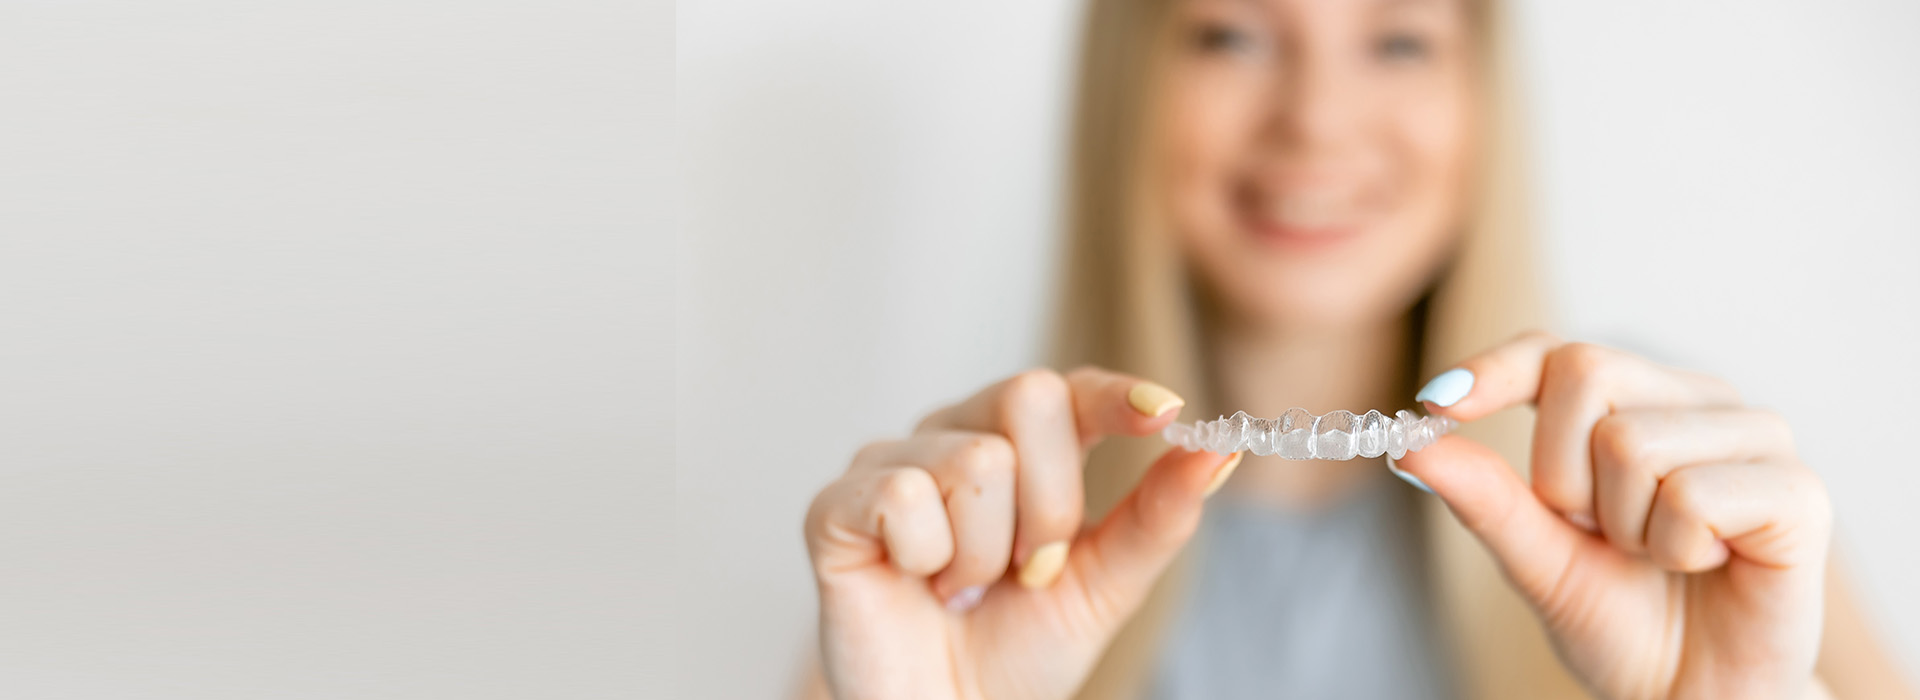 St. John Smiles Family Dentistry | Invisalign reg , Dentures and Root Canals